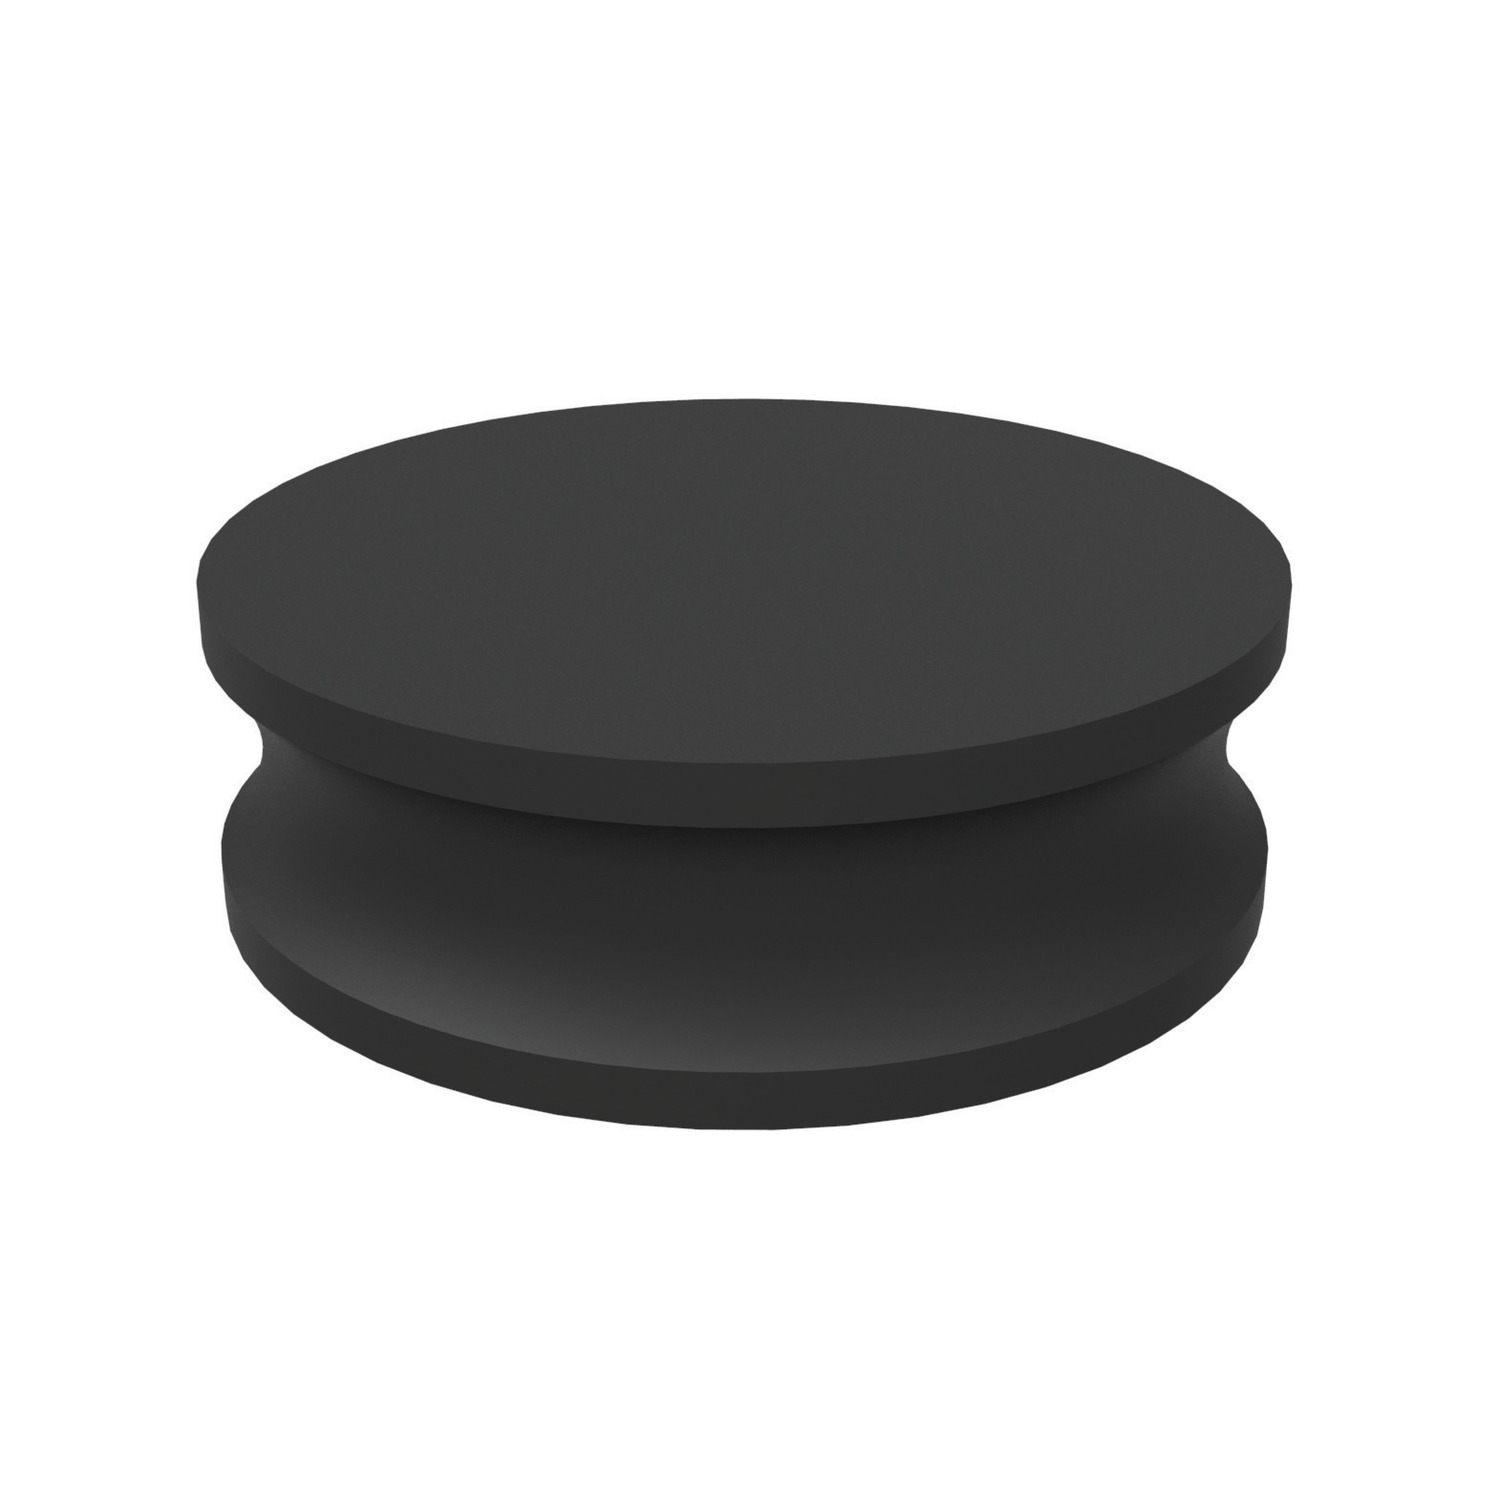 Rubber Pads Round anti-vibration pads. Available in a 140mm or 150mm diameter with a height of 45mm.